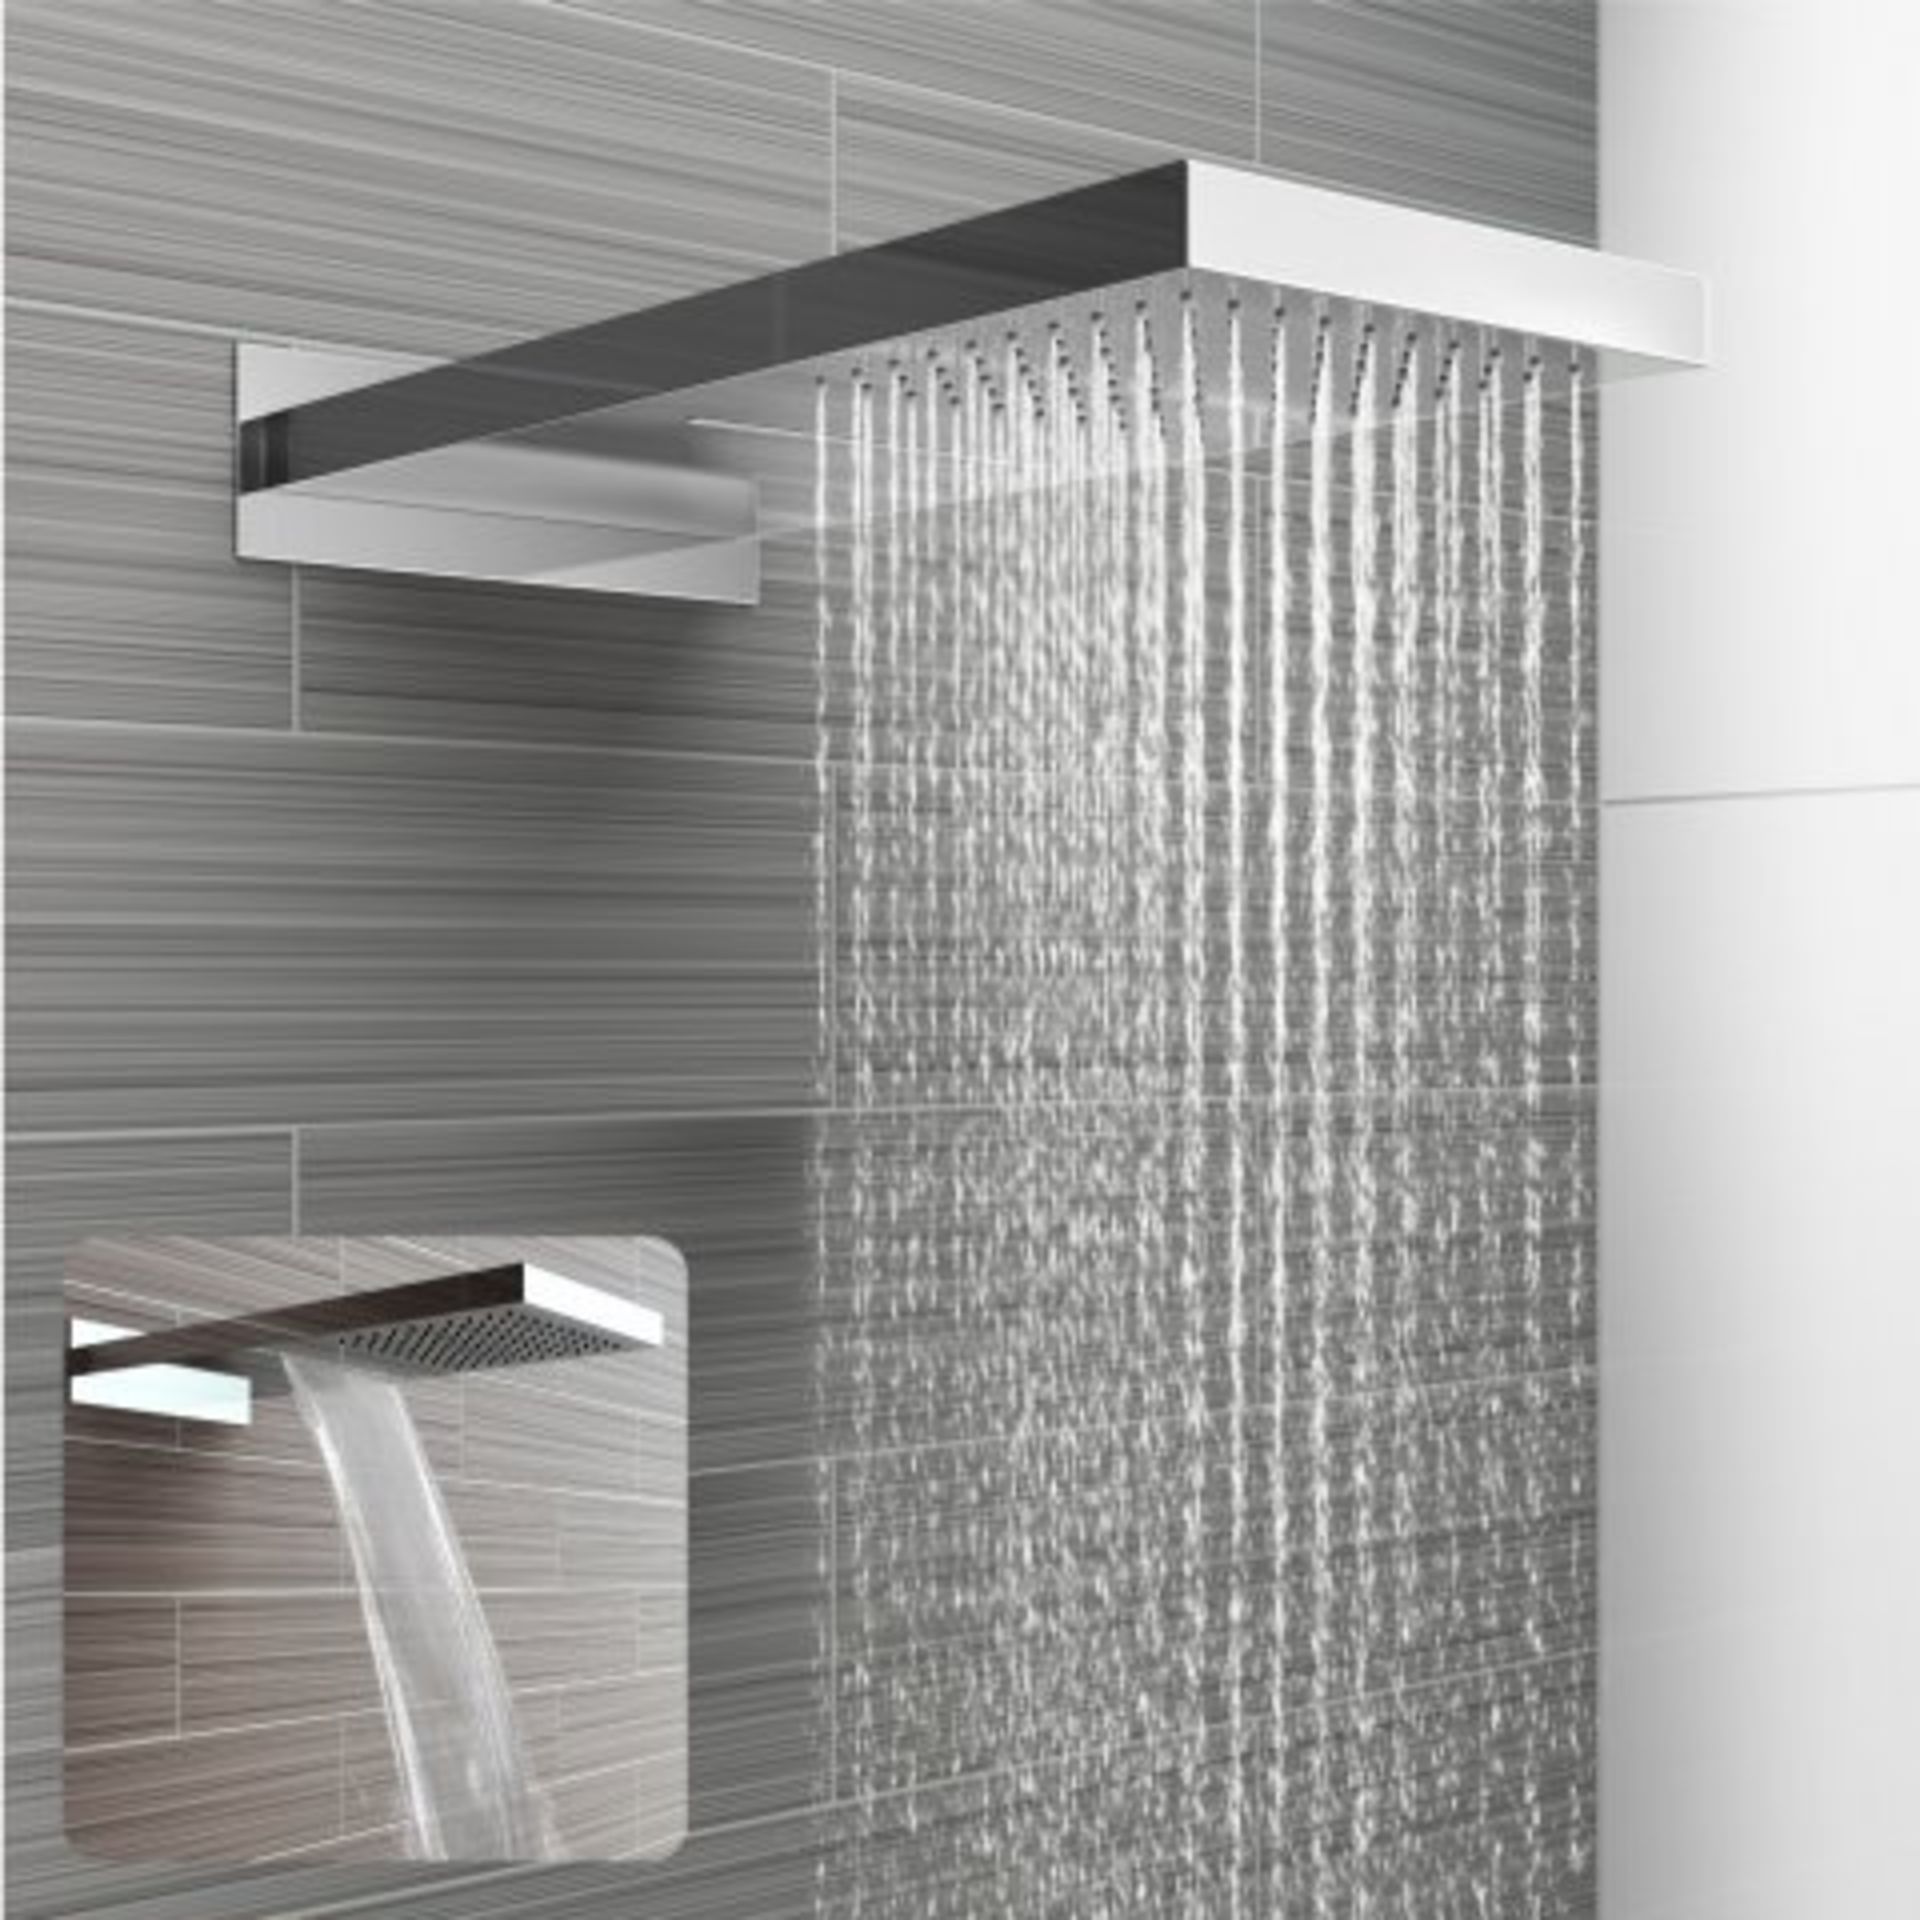 (Y45) Stainless Steel 230x500mm Waterfall Shower Head. RRP £374.98. "What An Experience": Enjoy